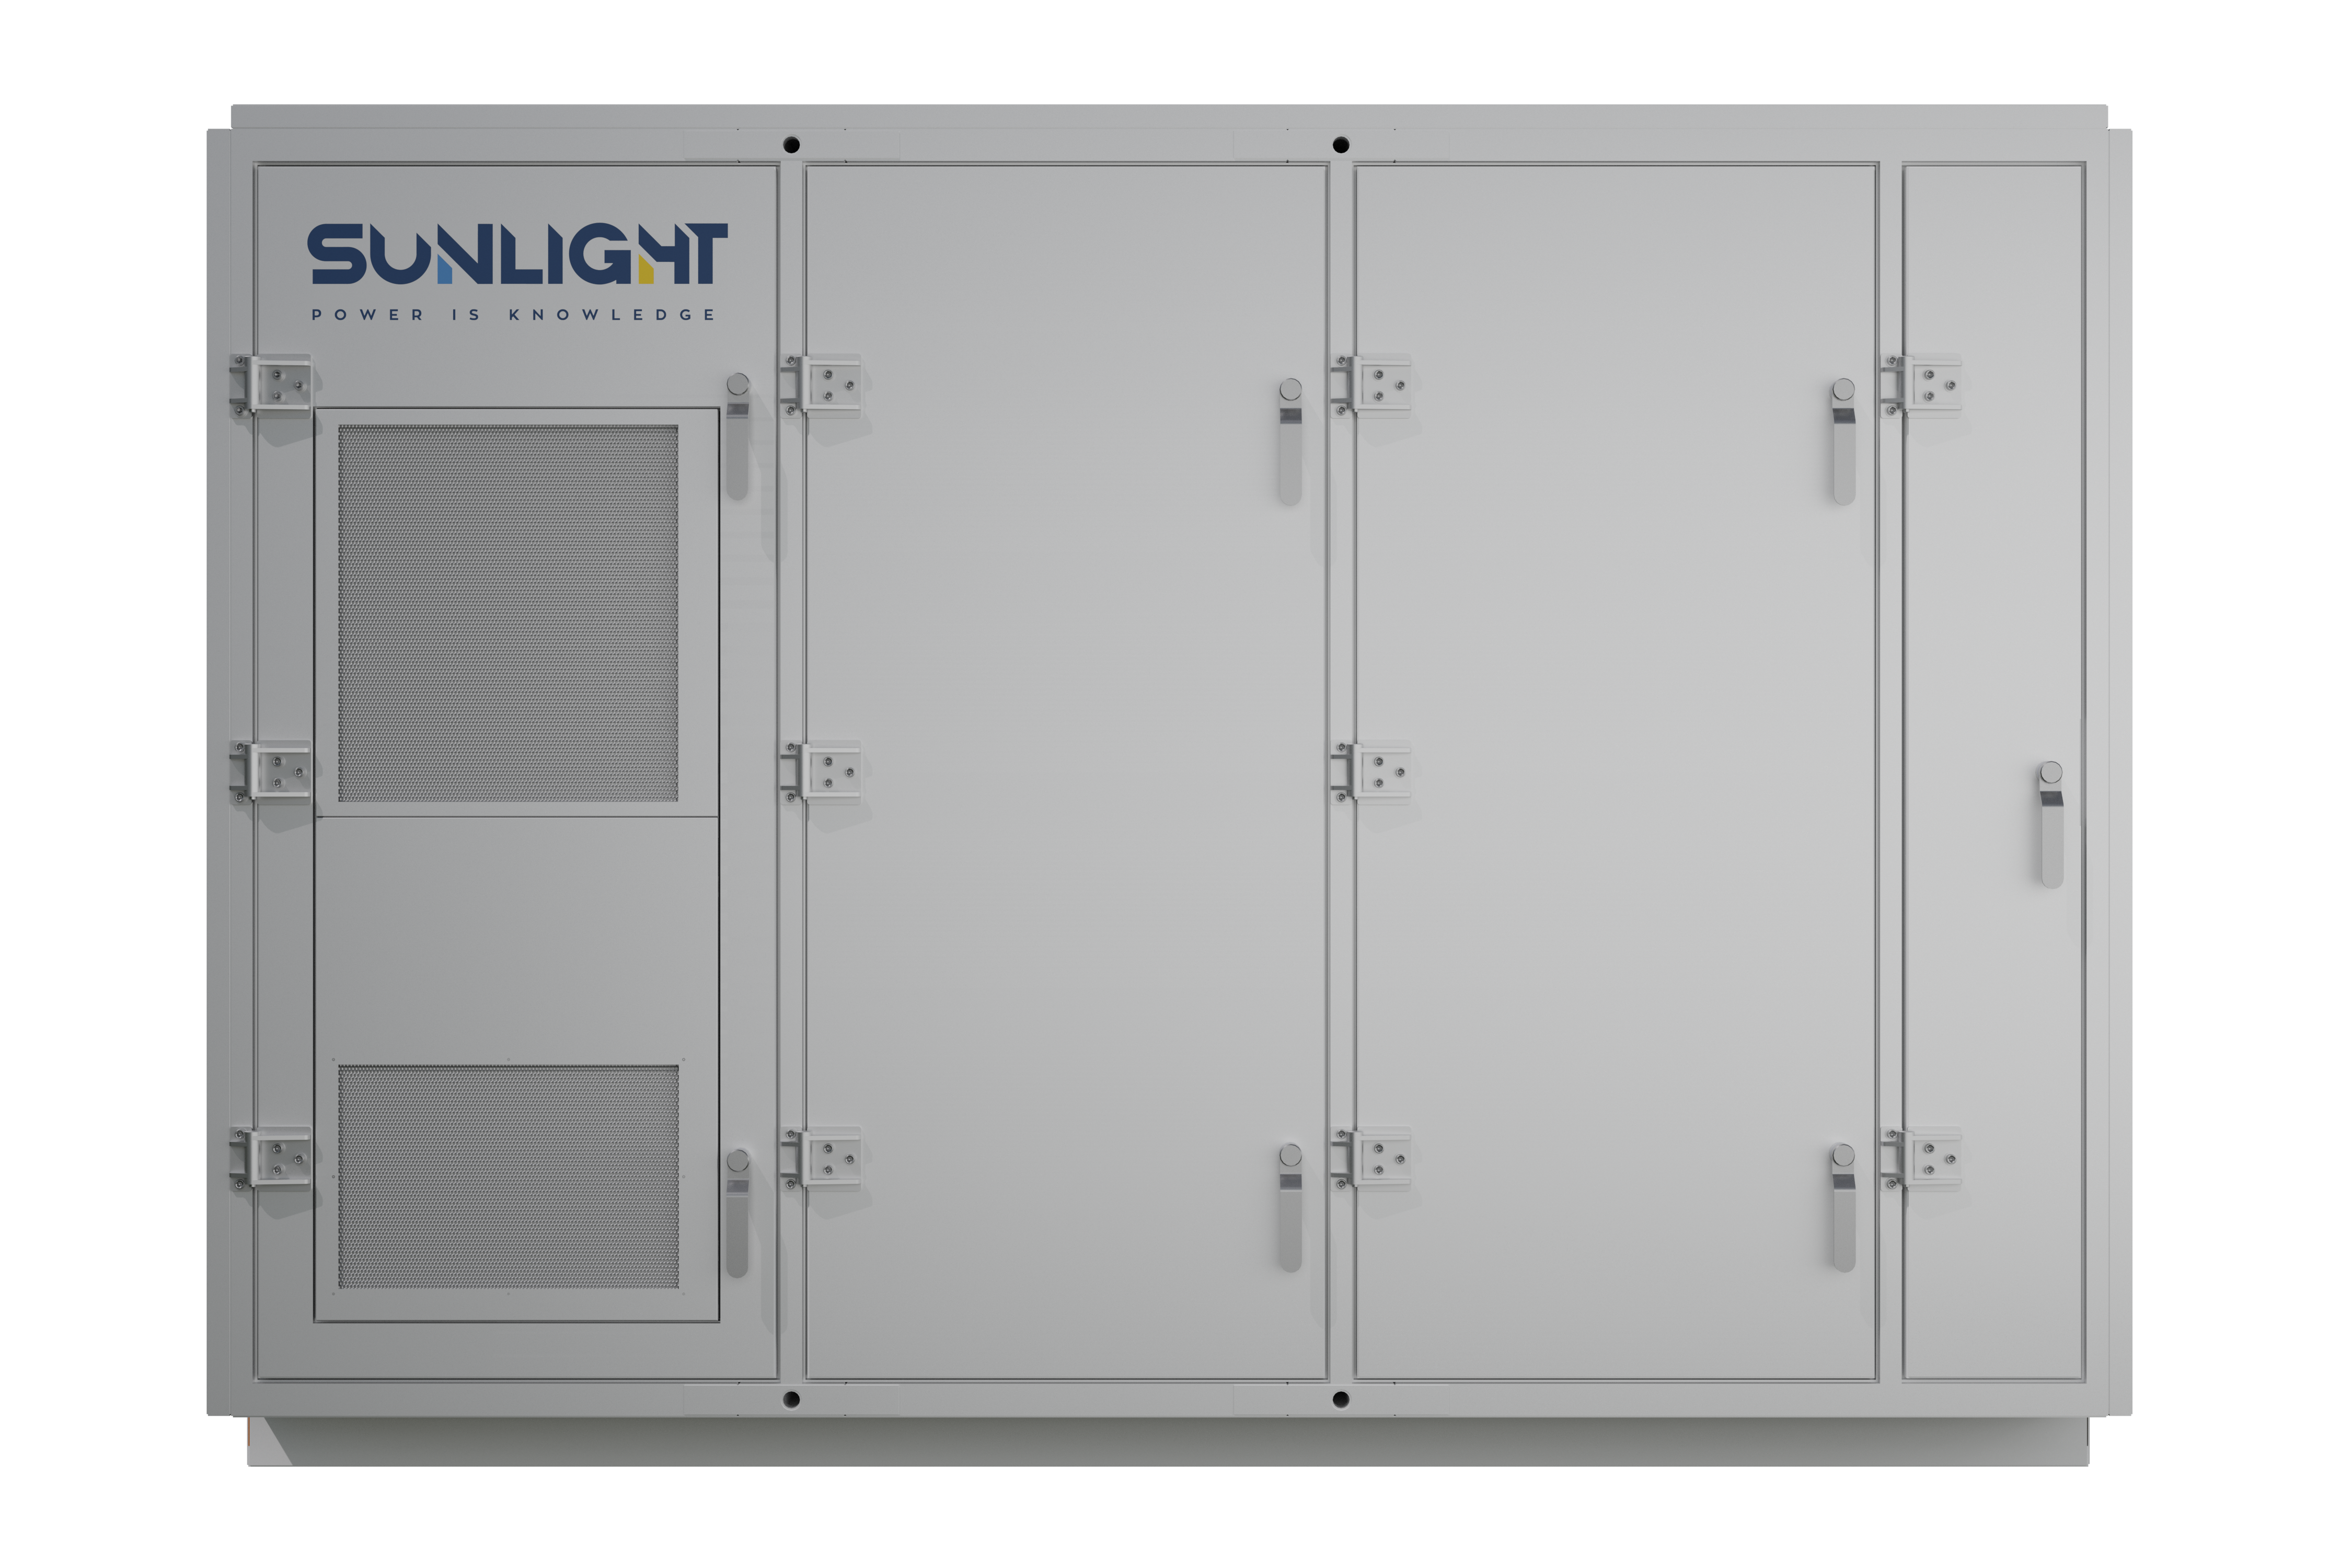 Sunlight Li.ON ESS DC Block -  a complete system design with features such as high energy density, battery management, multilevel safety protection, and outdoor cabinets with a modular design.